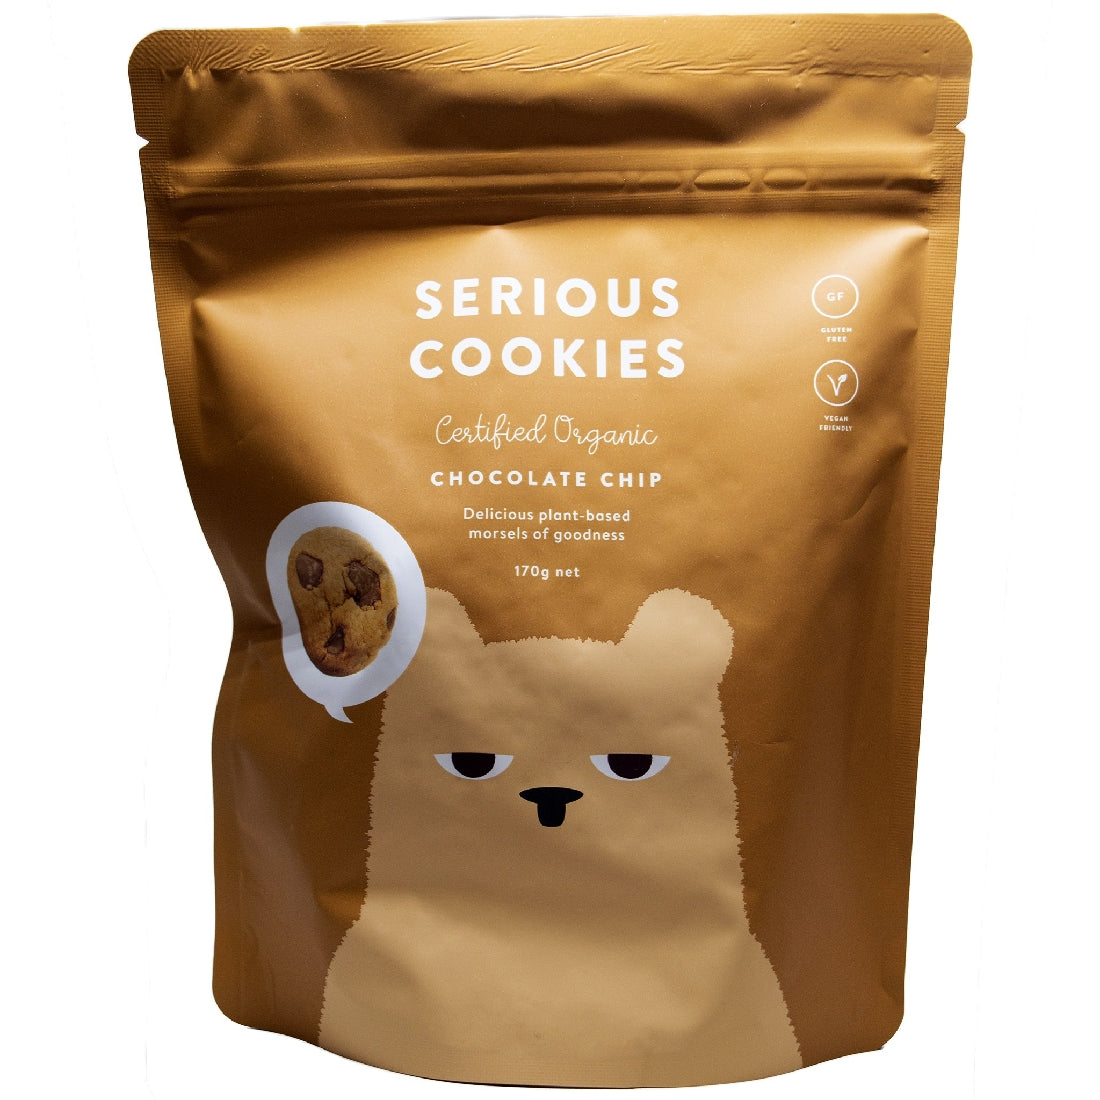 SERIOUS COOKIES CHOCOLATE CHIP CHEWY COOKIES 170G